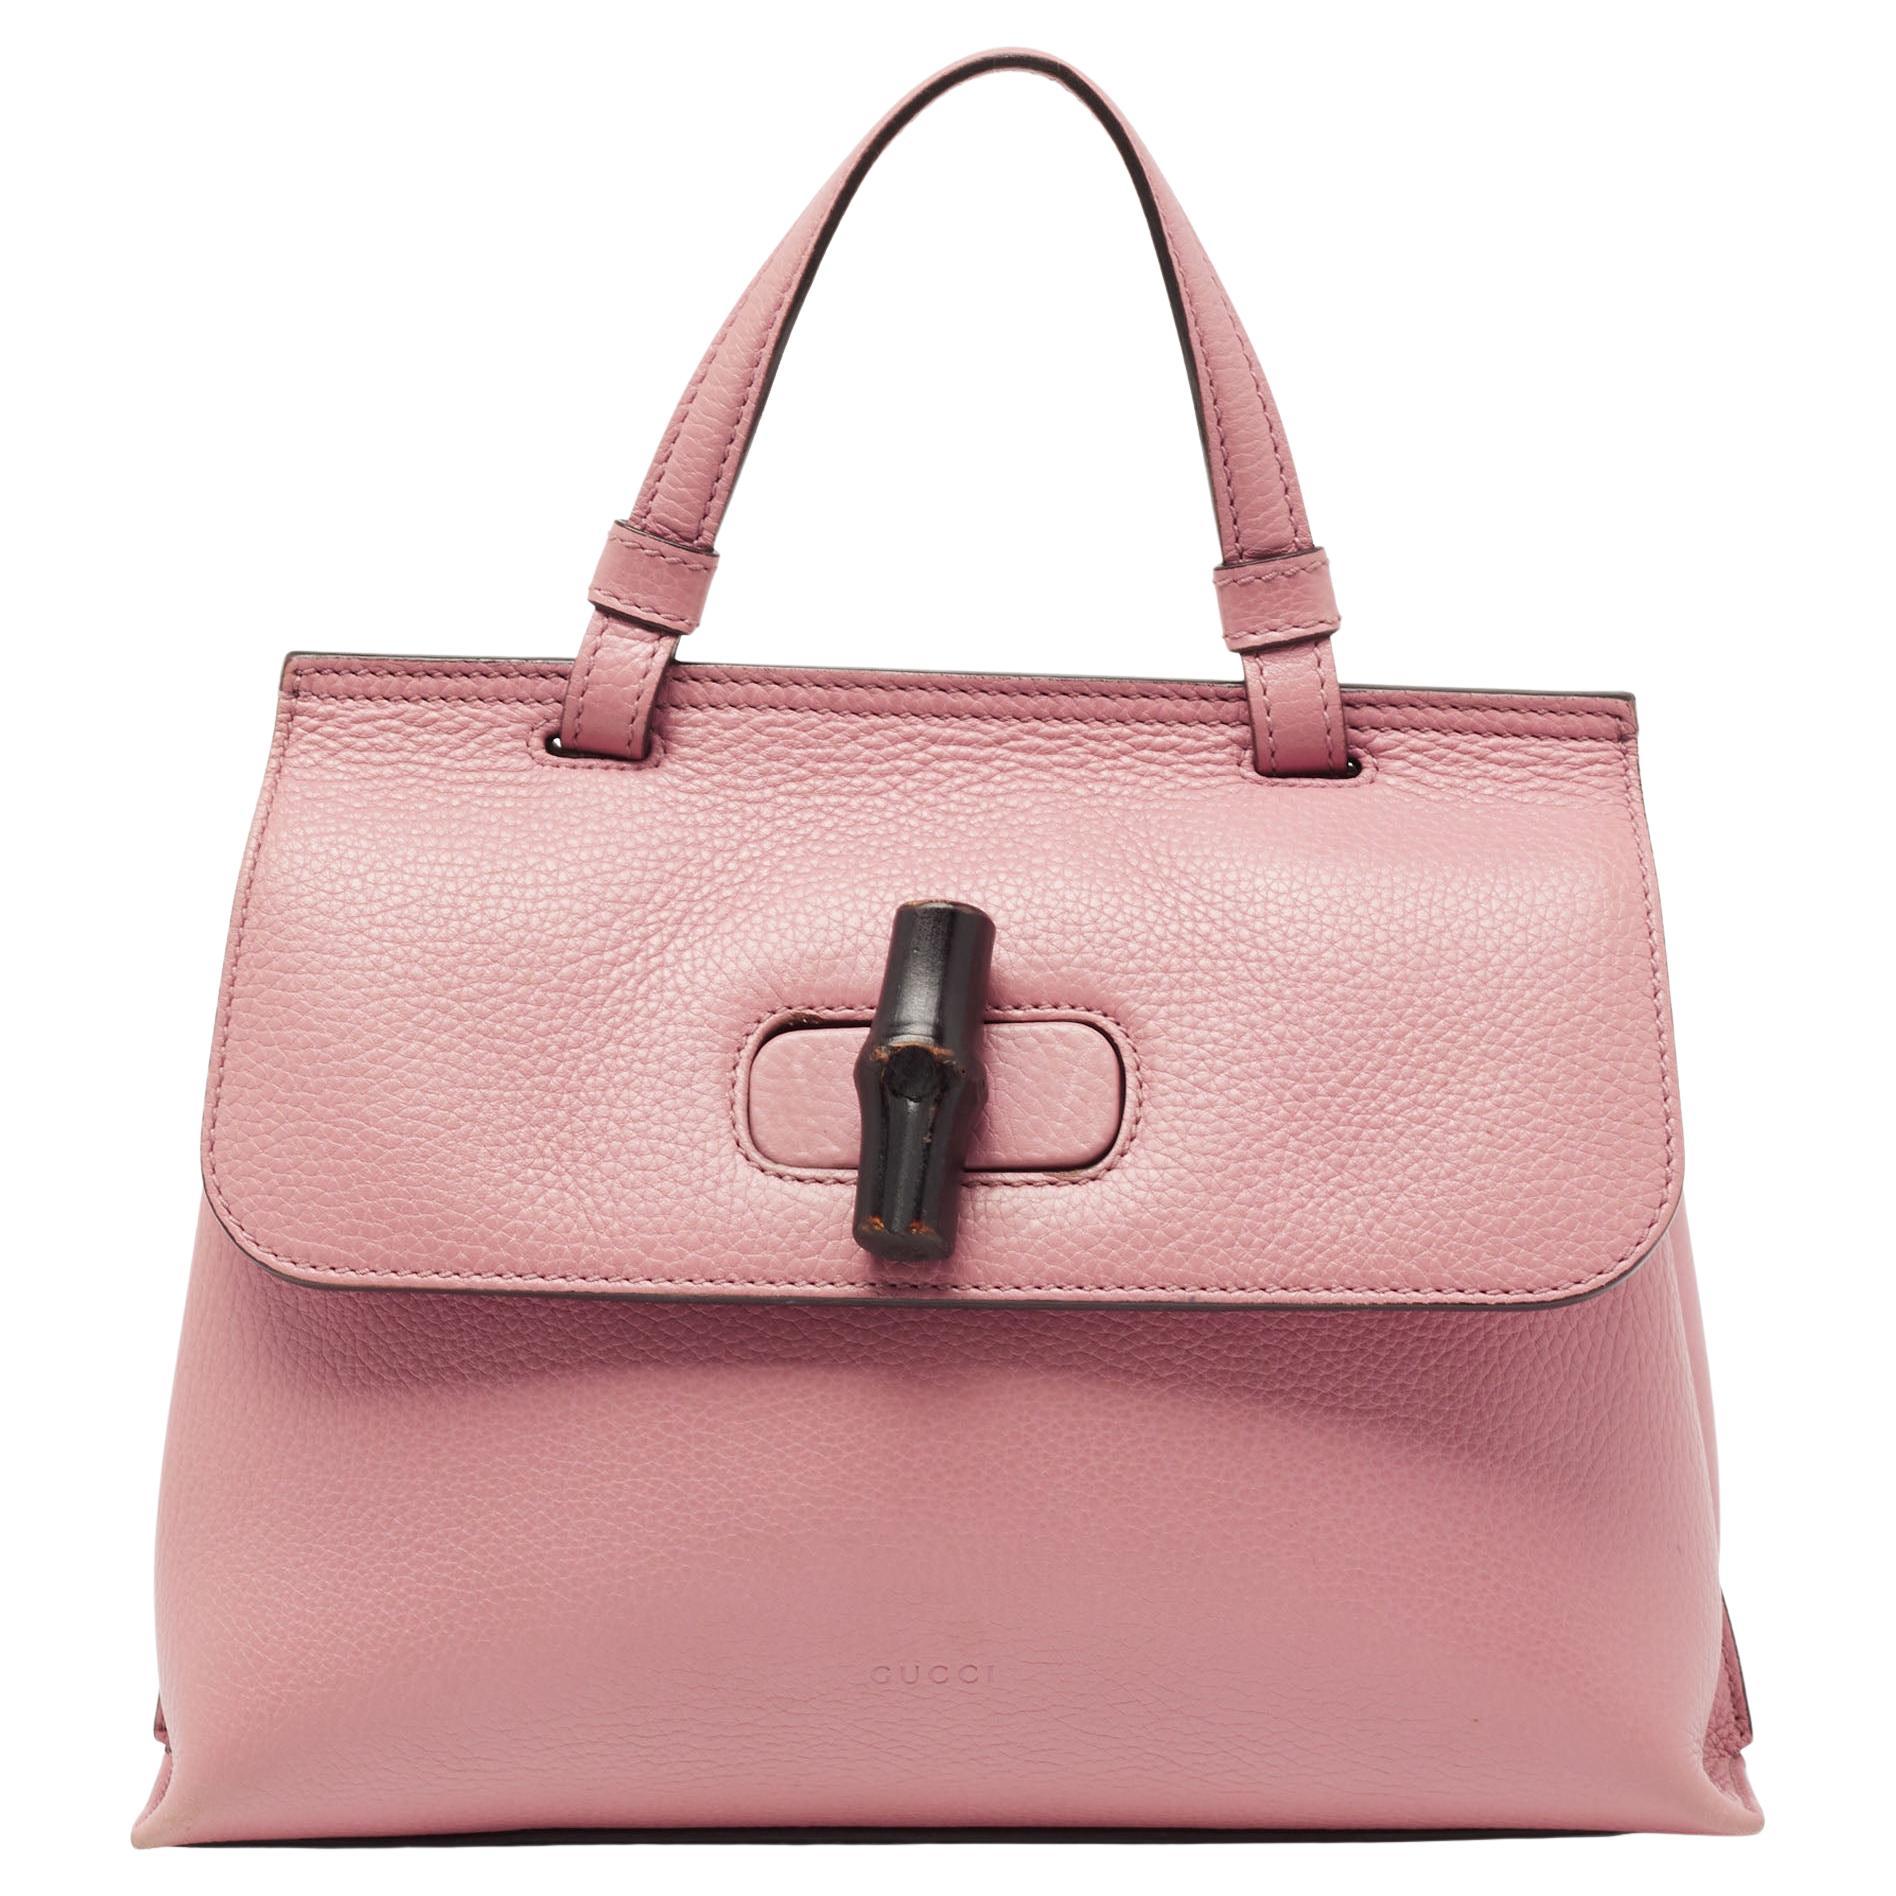 Gucci Pink Leather Small Bamboo Daily Top Handle Bag